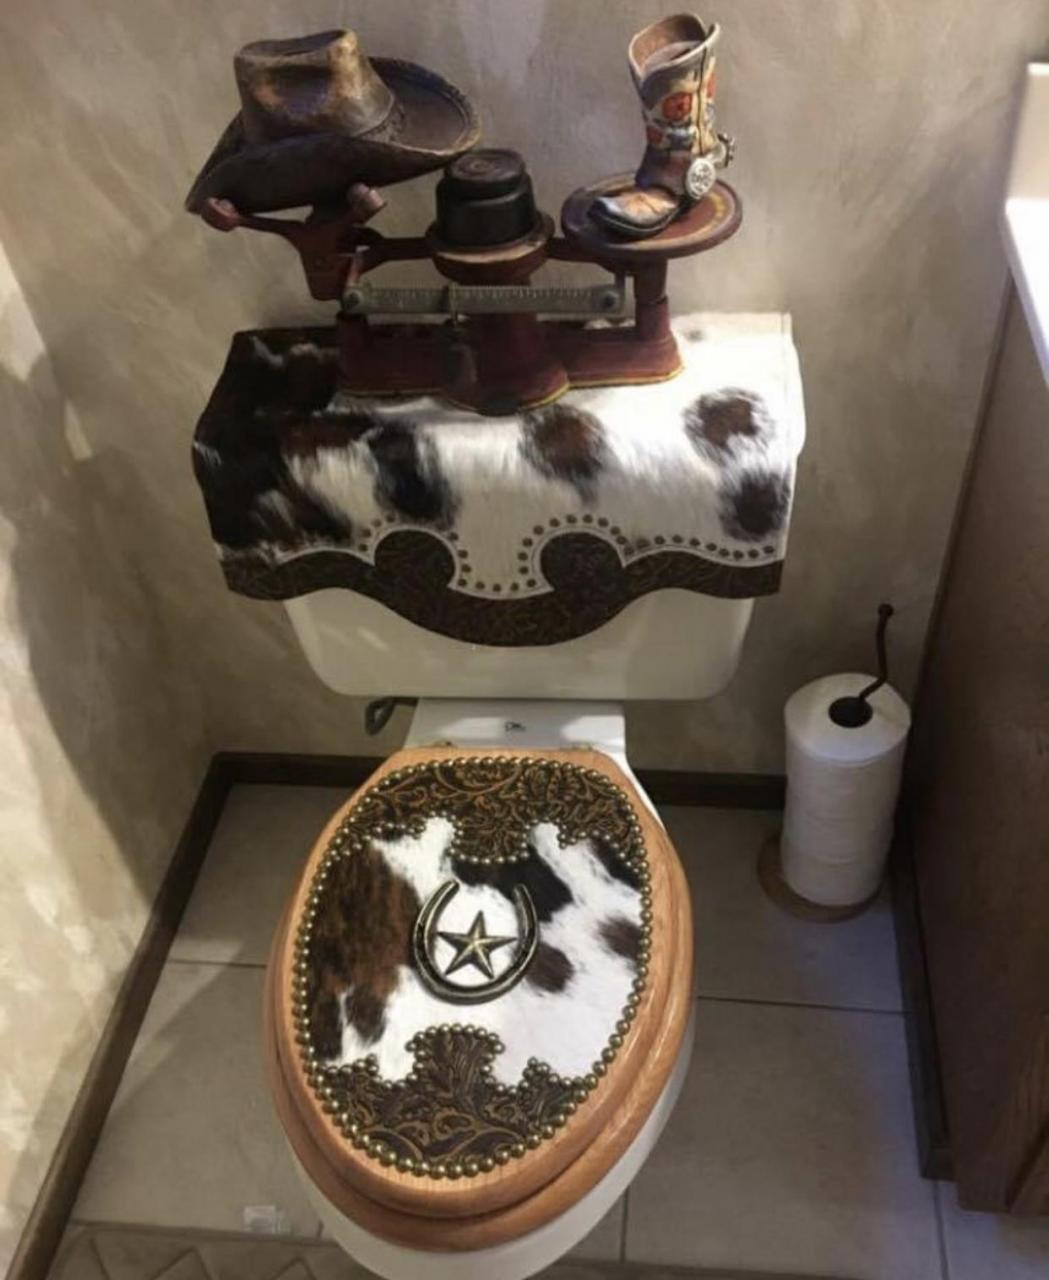 Western Decor Cowhide Leather Bathroom Toilet Tank Cover Signature